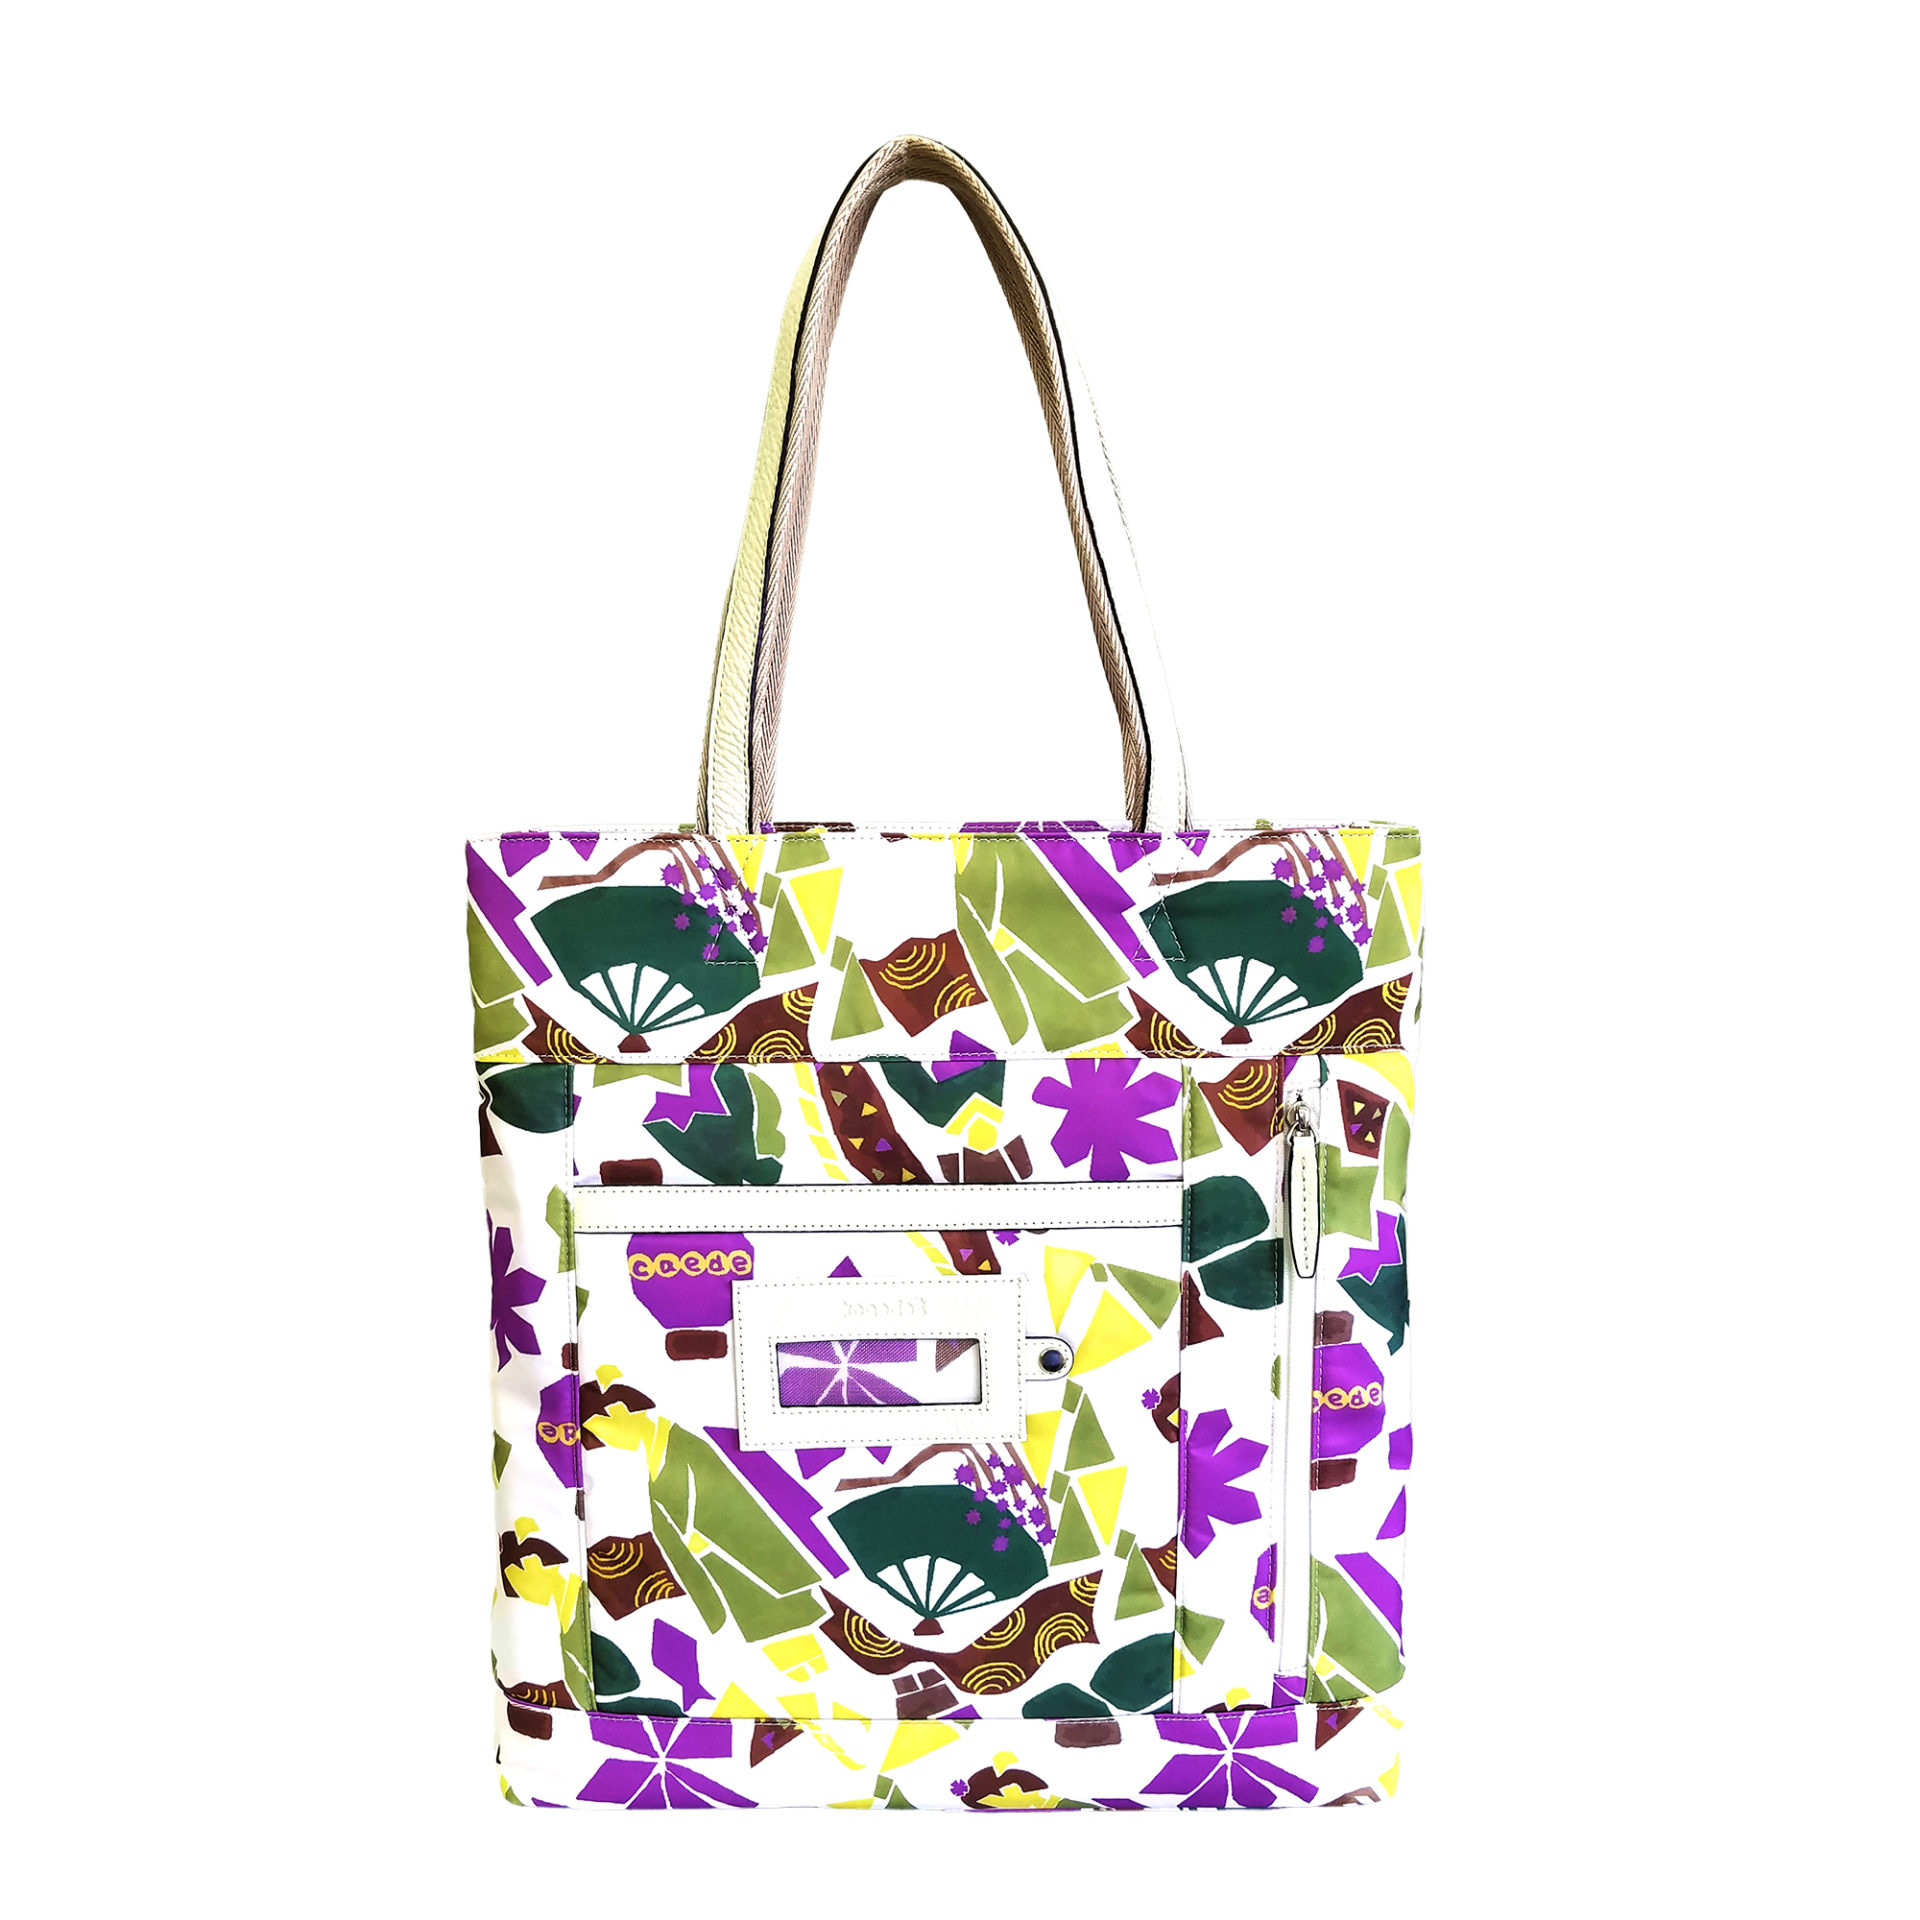 Maiko Puzzle Etna tote ivory